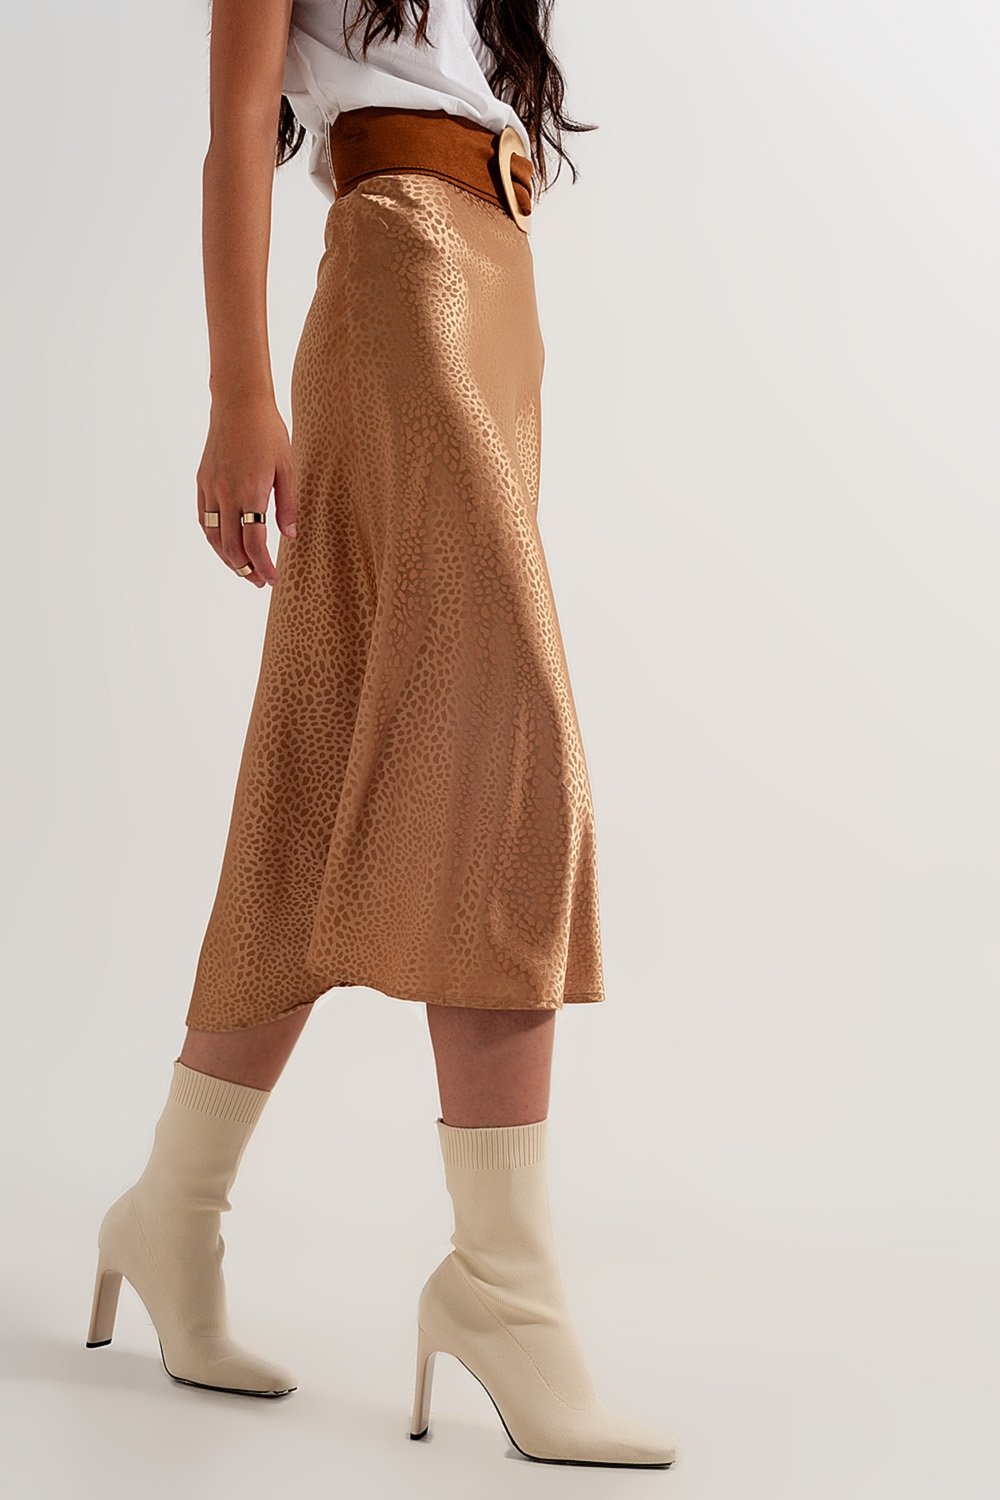 Gold Color Midi Skirt in Abstract Animal Print